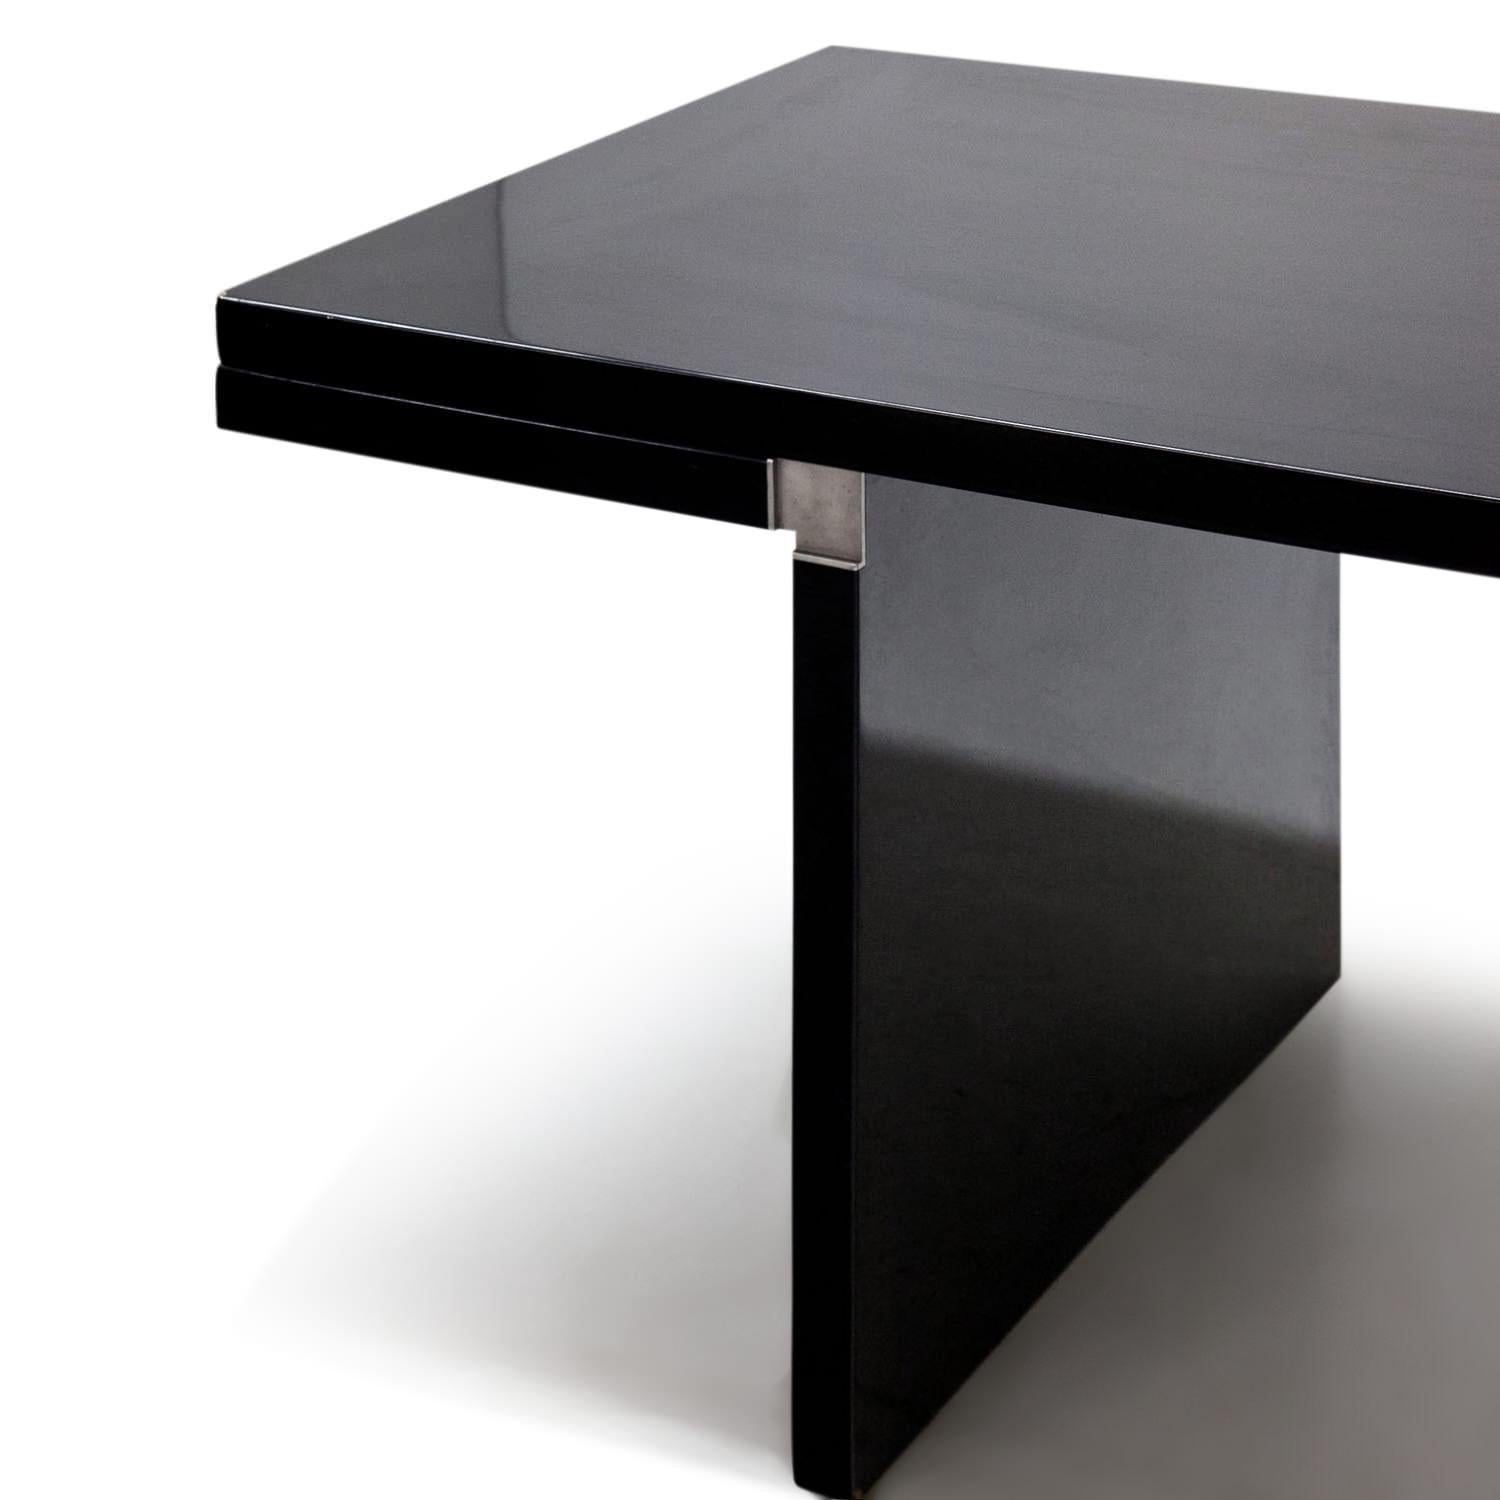 Long rectangular ‘Orseolo’ dining table, designed by Carlo Scarpa in 1972 for Gavina. The completely black table receives its unique and extravagant look through the unusual construction of the inner corners with metal angles. The table is labelled